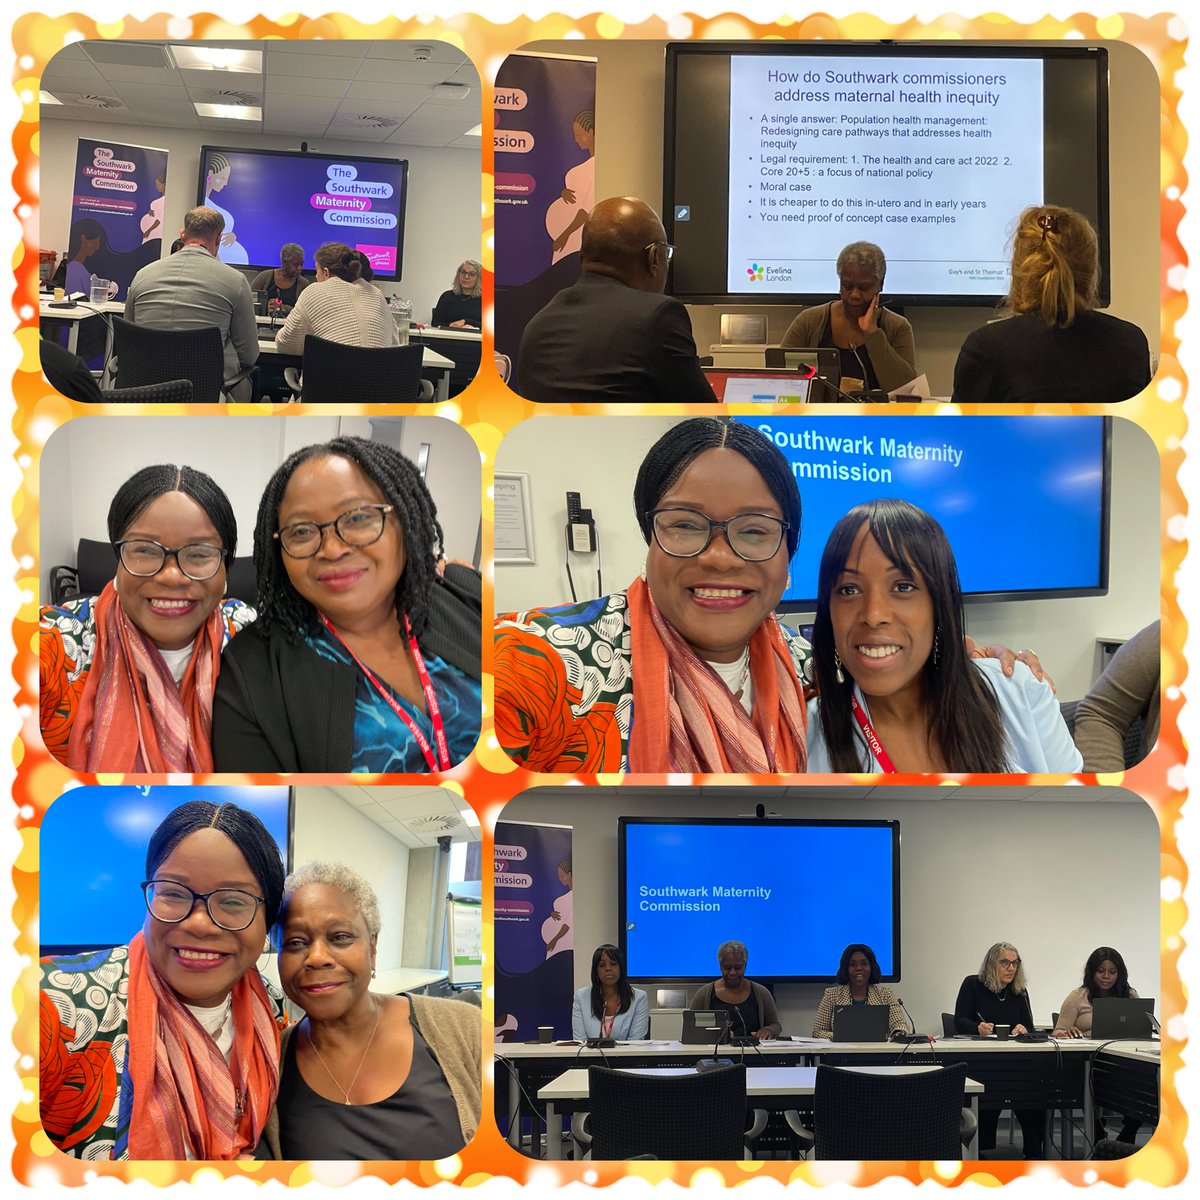 Insightful discussions and presentations at the Southwark Maternity Commission set up by @evenor23, Southwark’s Cabinet Member for Health & Wellbeing -Lisa presented brilliantly for @KingsCollegeNHS. Lots of work to do in SEL but we are on a journey #equityinmaternityservices